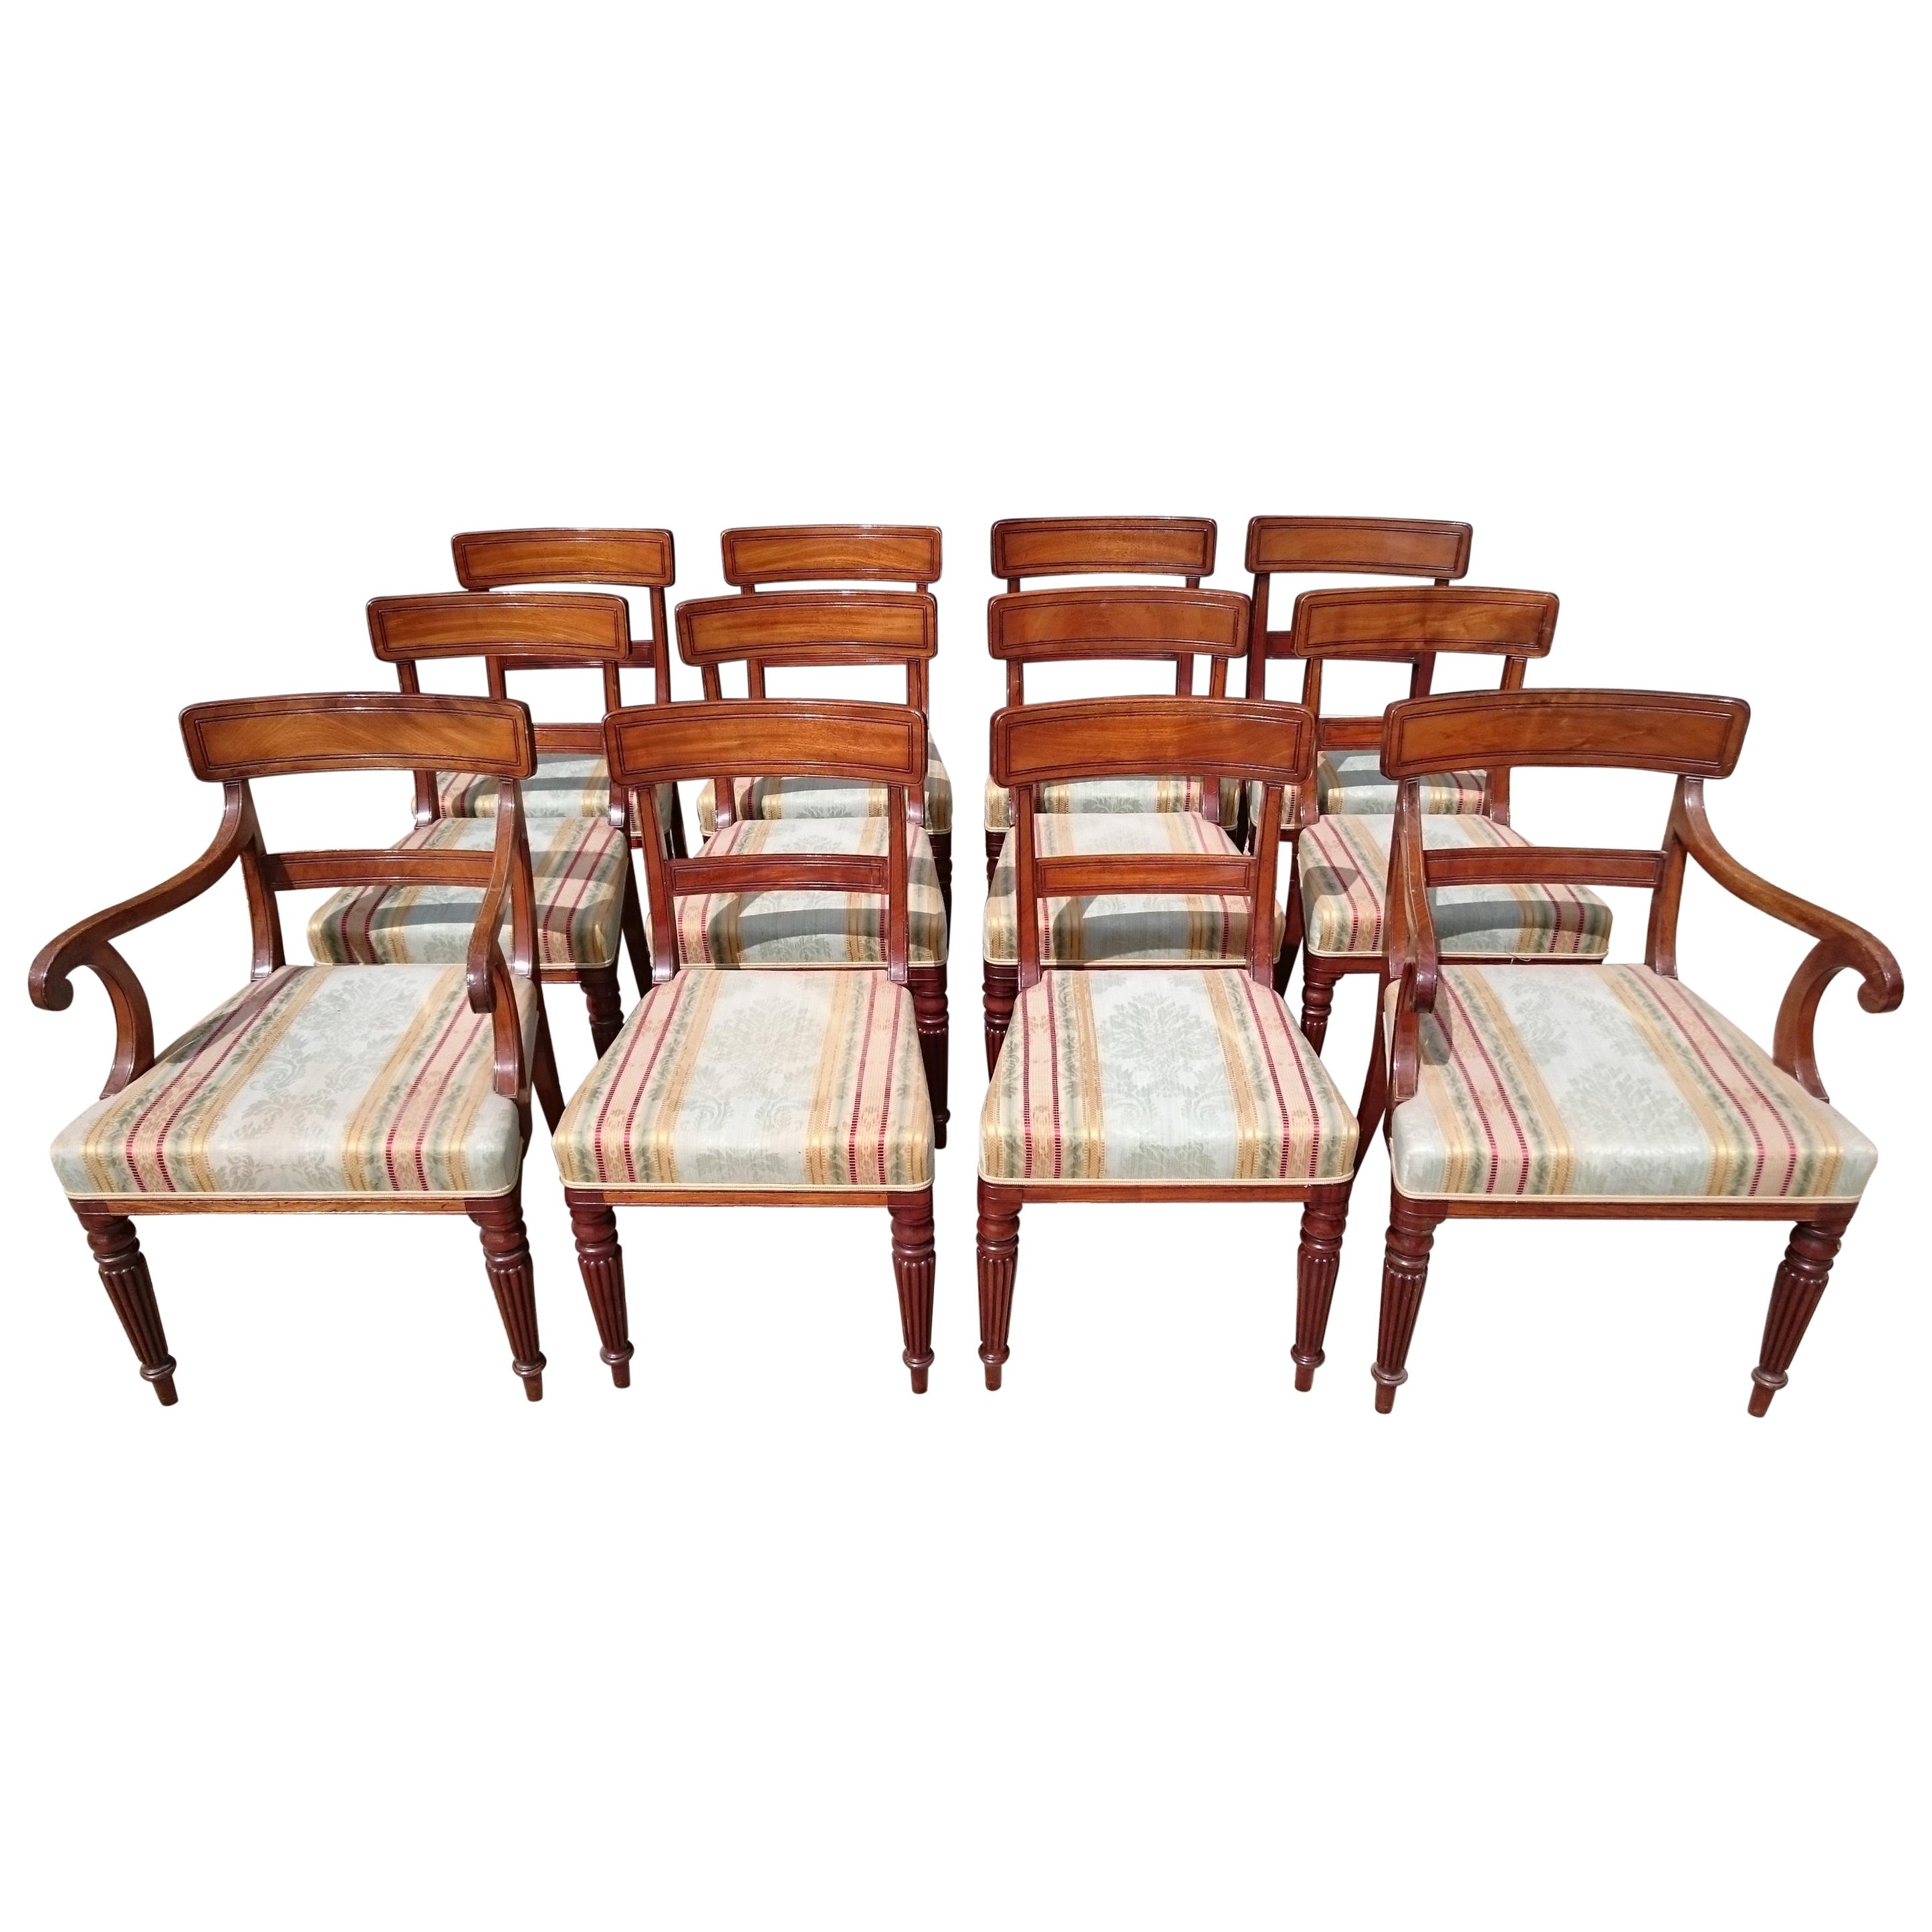 Set of Twelve Early 19th Century Regency Mahogany Antique Dining Chairs